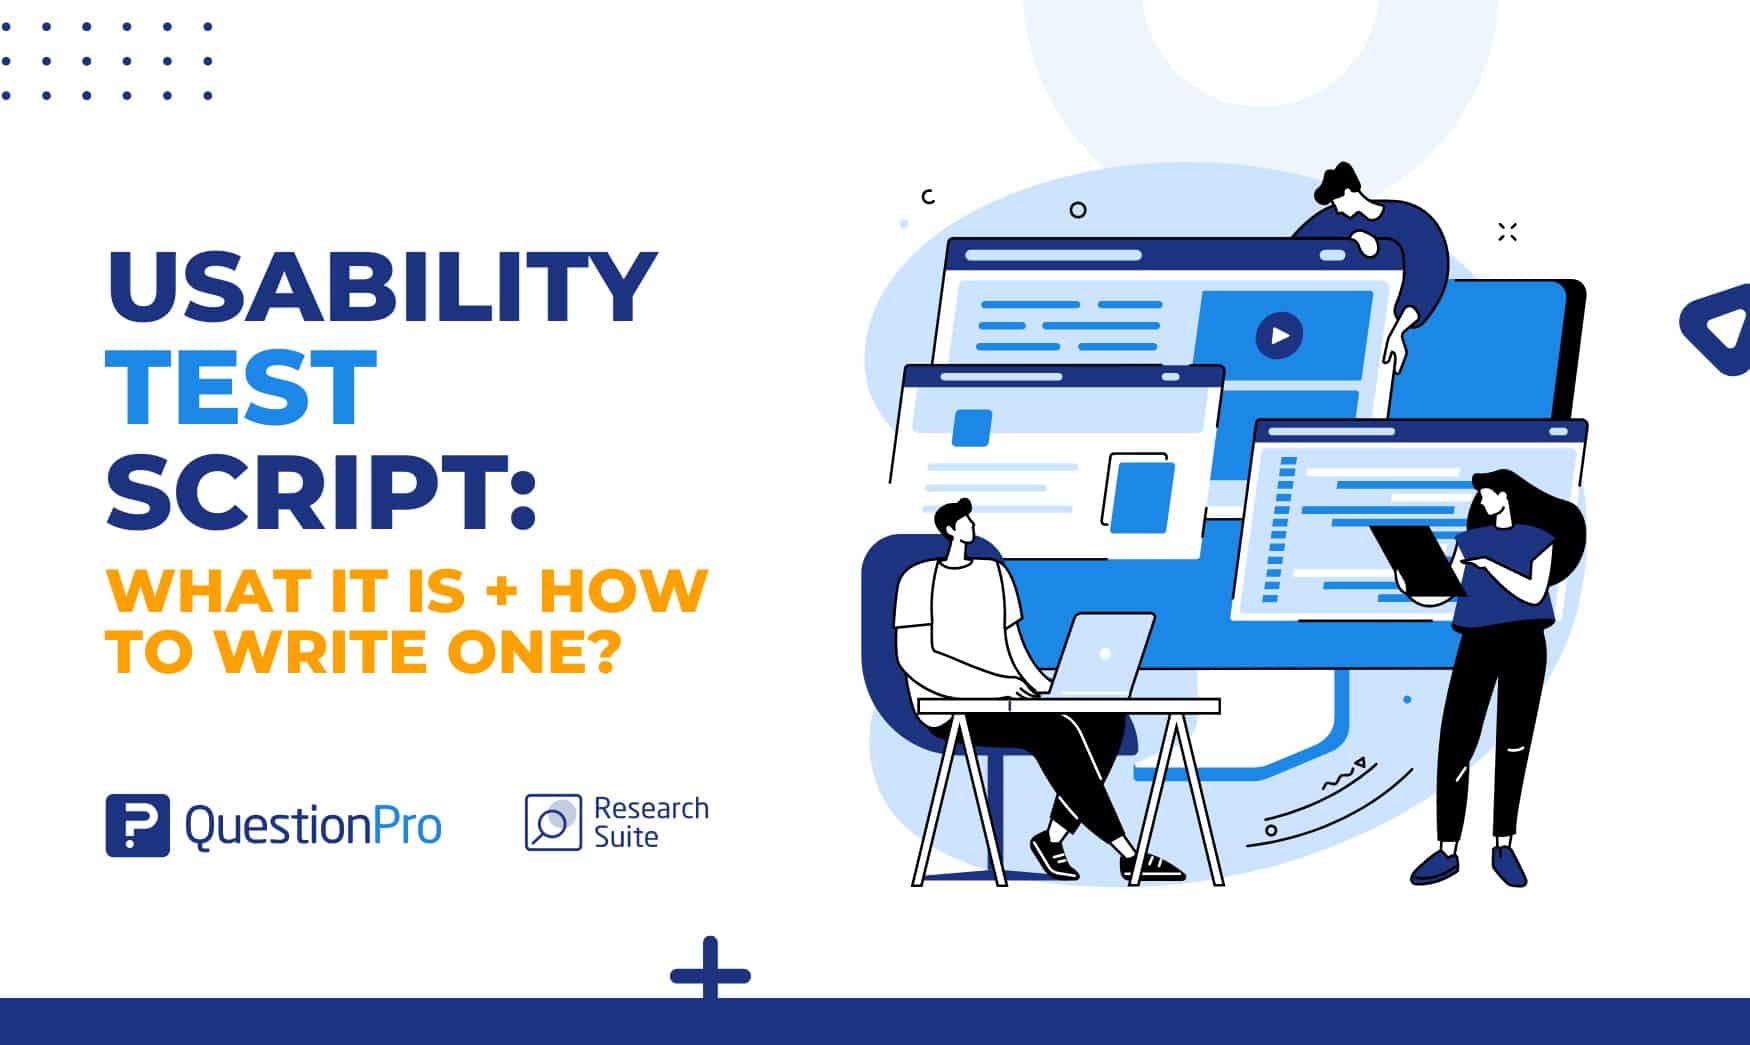 Discover what a usability test script is and learn how to create one effectively. Learn how to improve user experience and gather feedback.